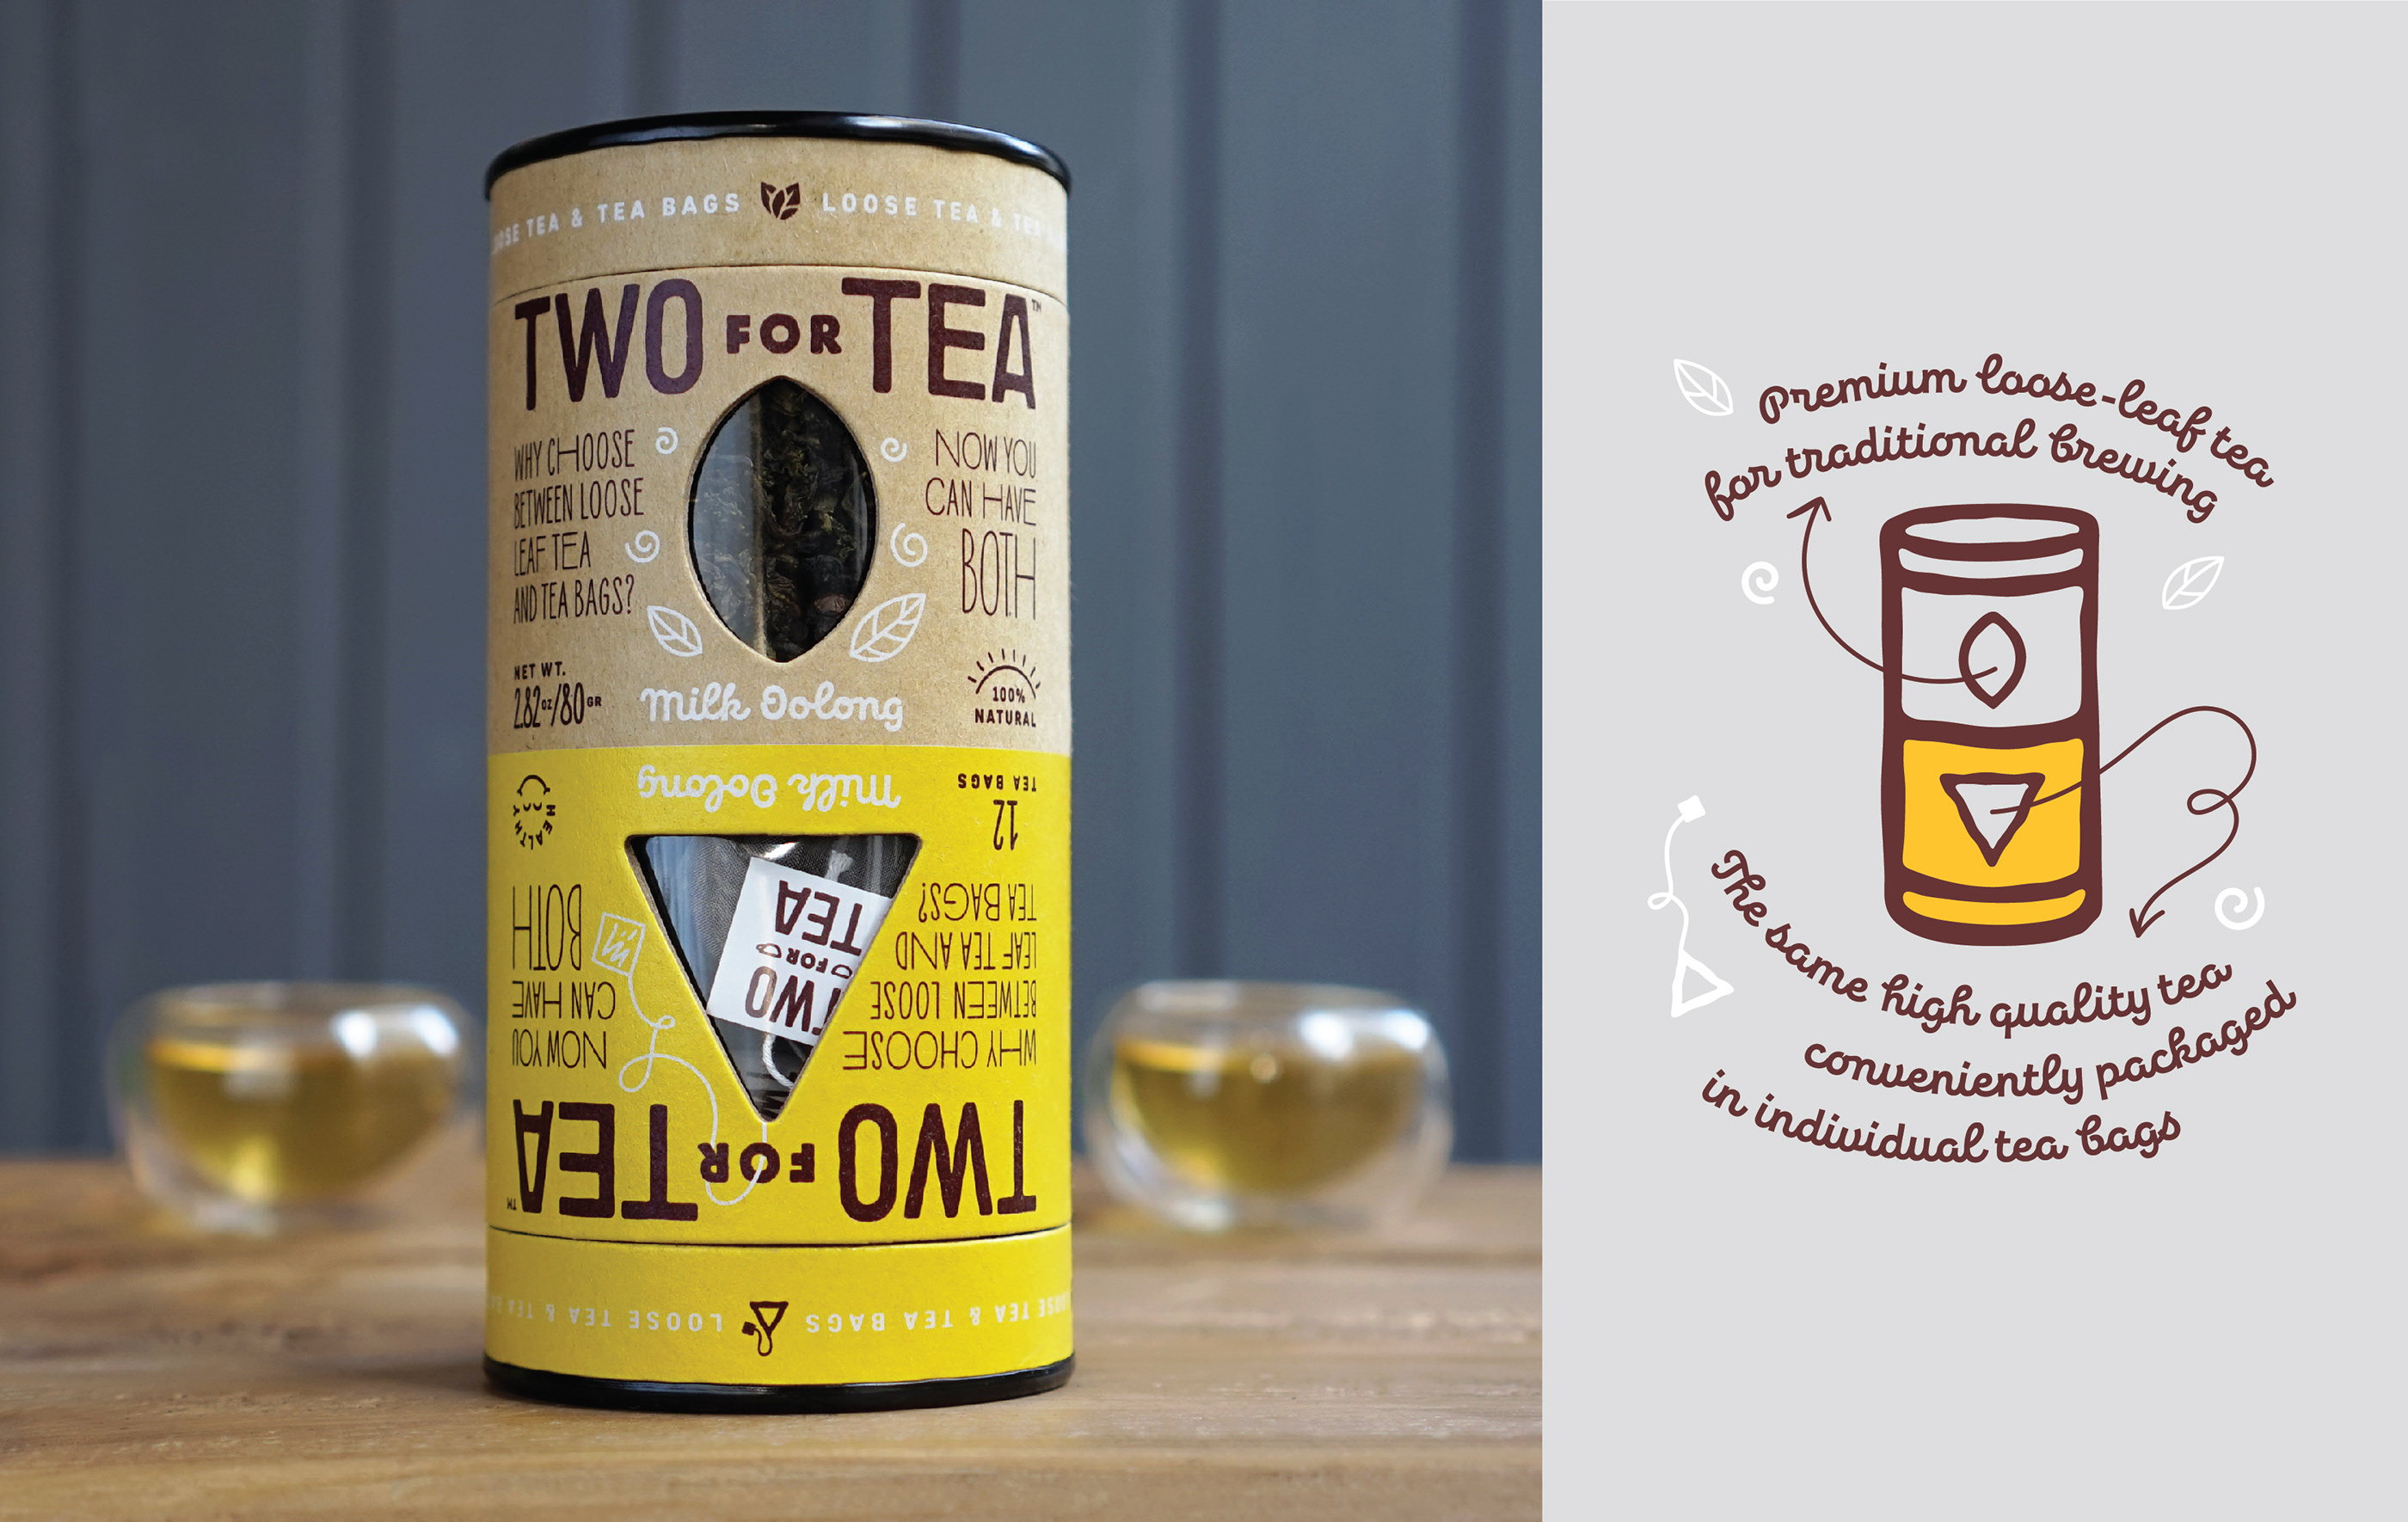 Package collection. Tea for two. Two Tea to two two. Текст на упаковке чая. Chai Studio.